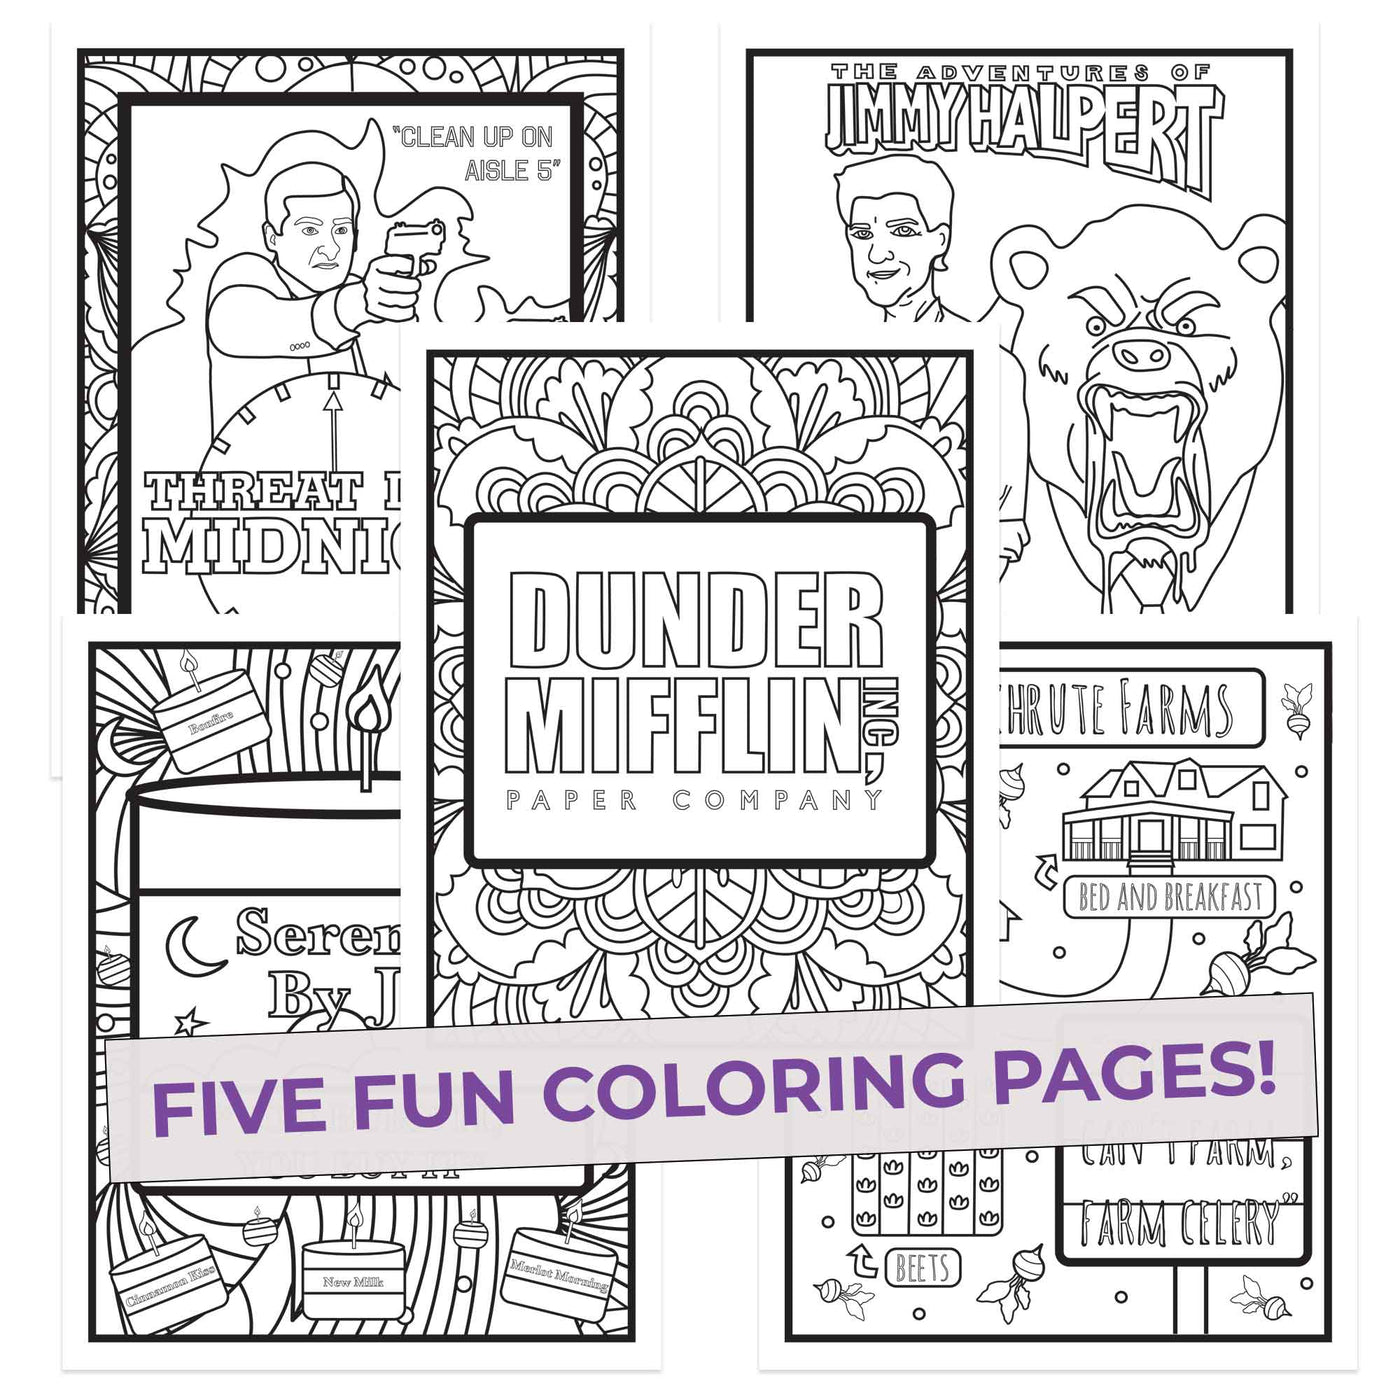 Five Office Colors Coloring Pages, Duner Mifflin Sign Mandala, five fun pages